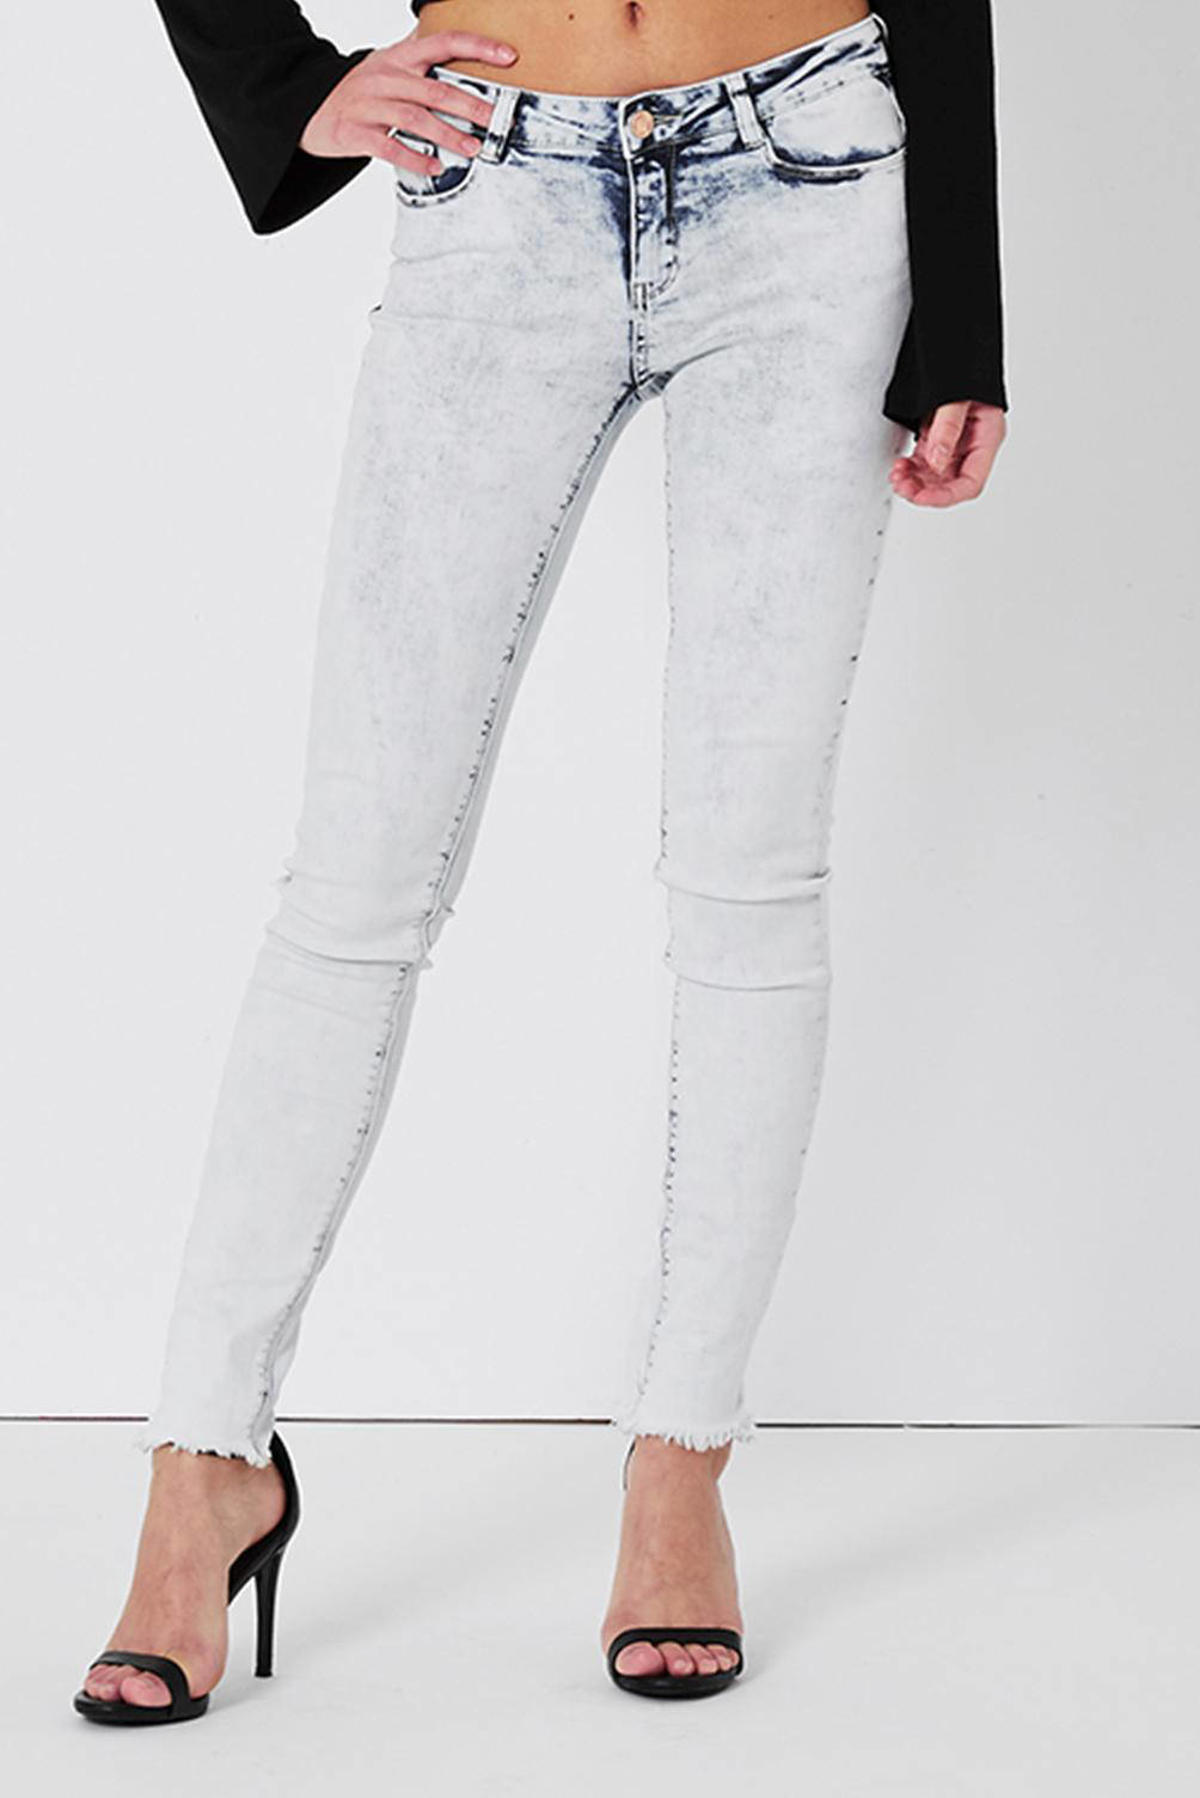 CoolCat skinny fit jeans lage taille wehkamp